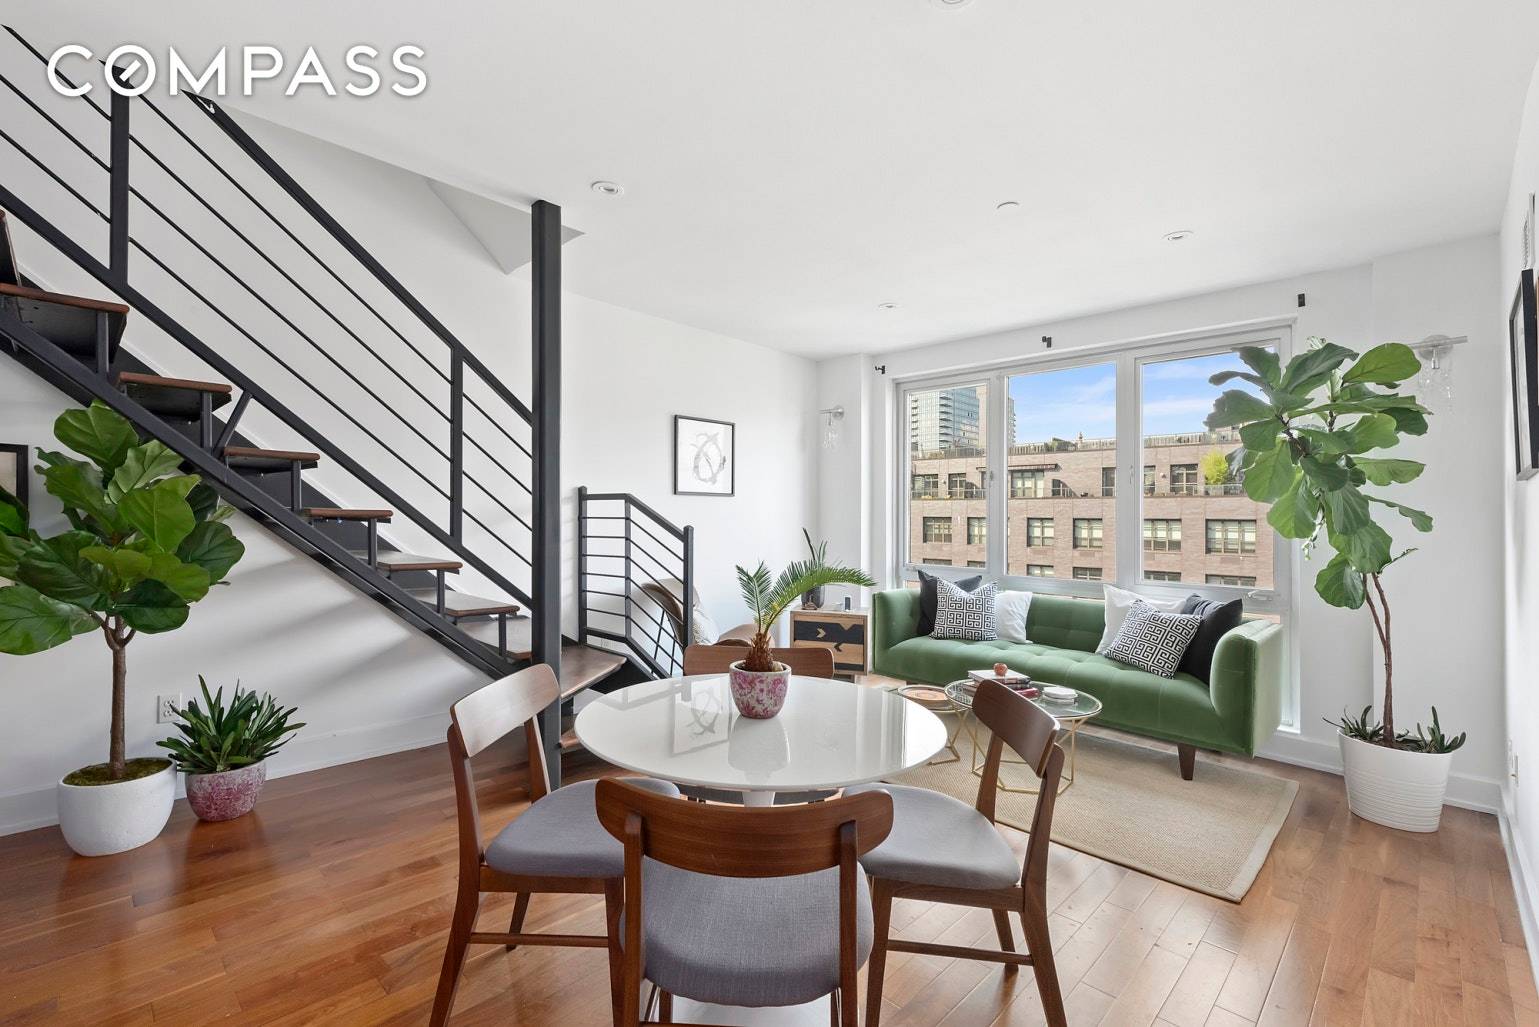 Located in the heart of Williamsburg this three bedroom, two bathroom duplex features 3 private outdoor spaces.